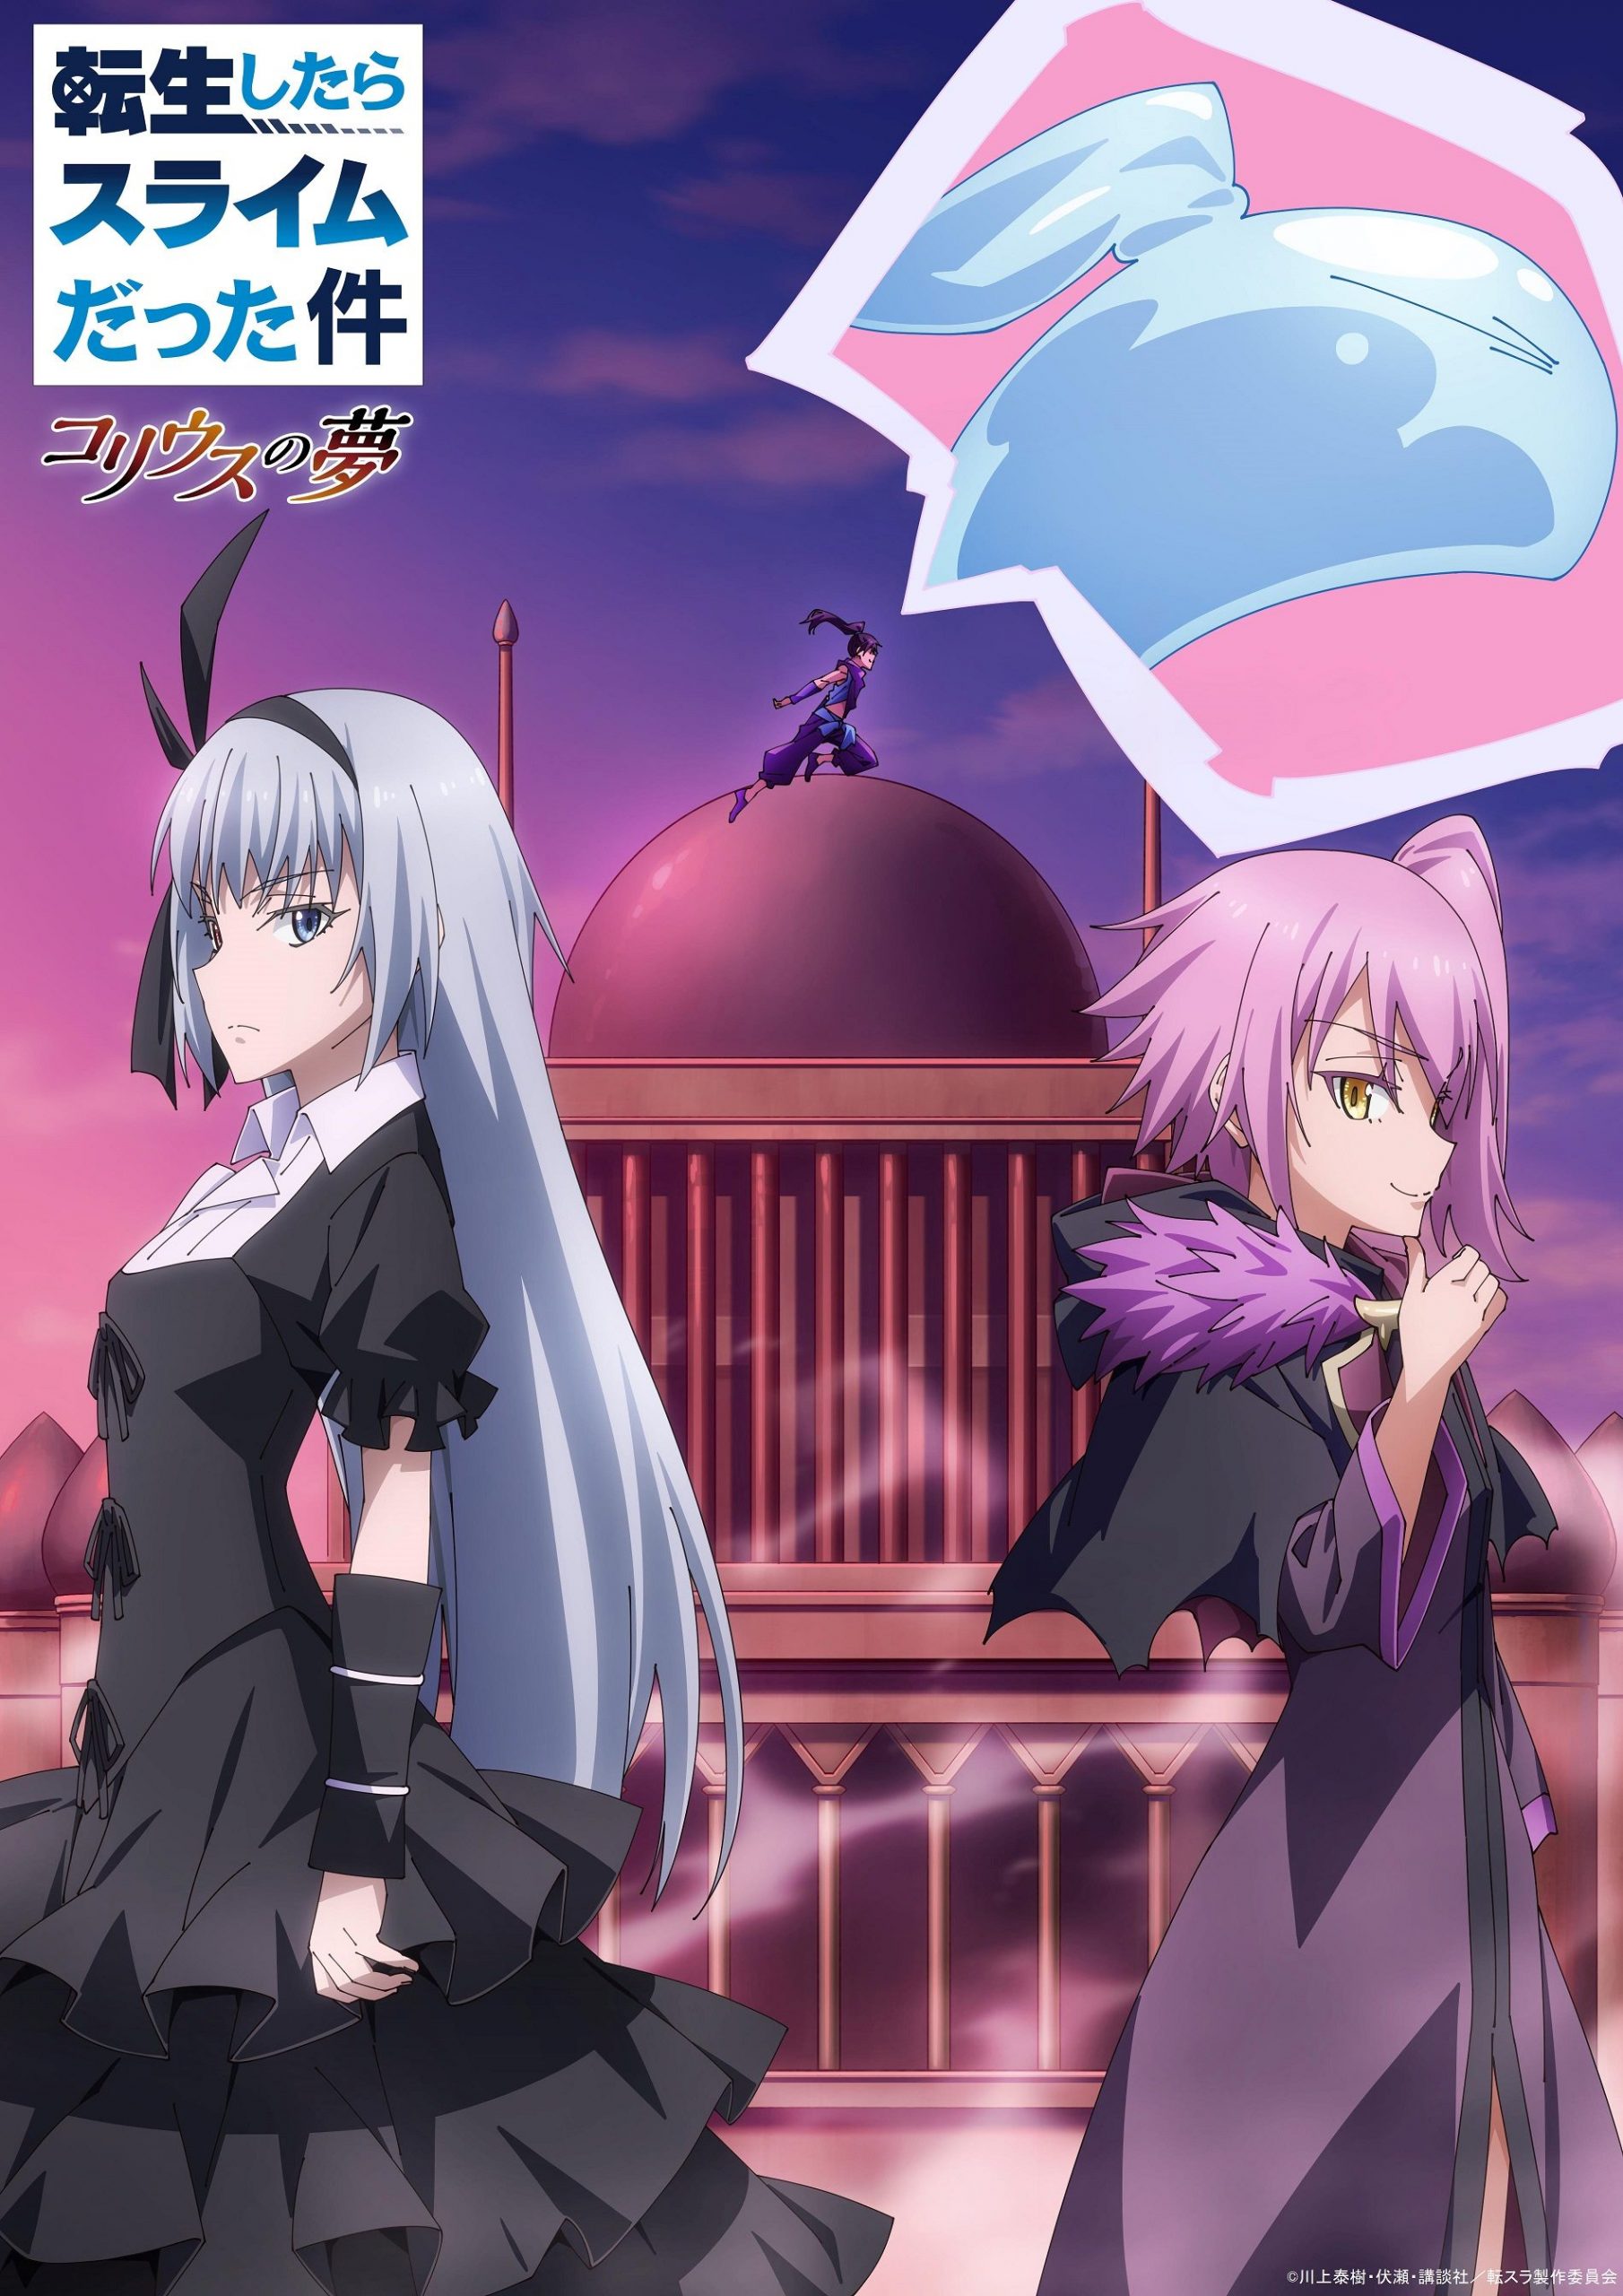 That Time I Got Reincarnated as a Slime - Wikipedia